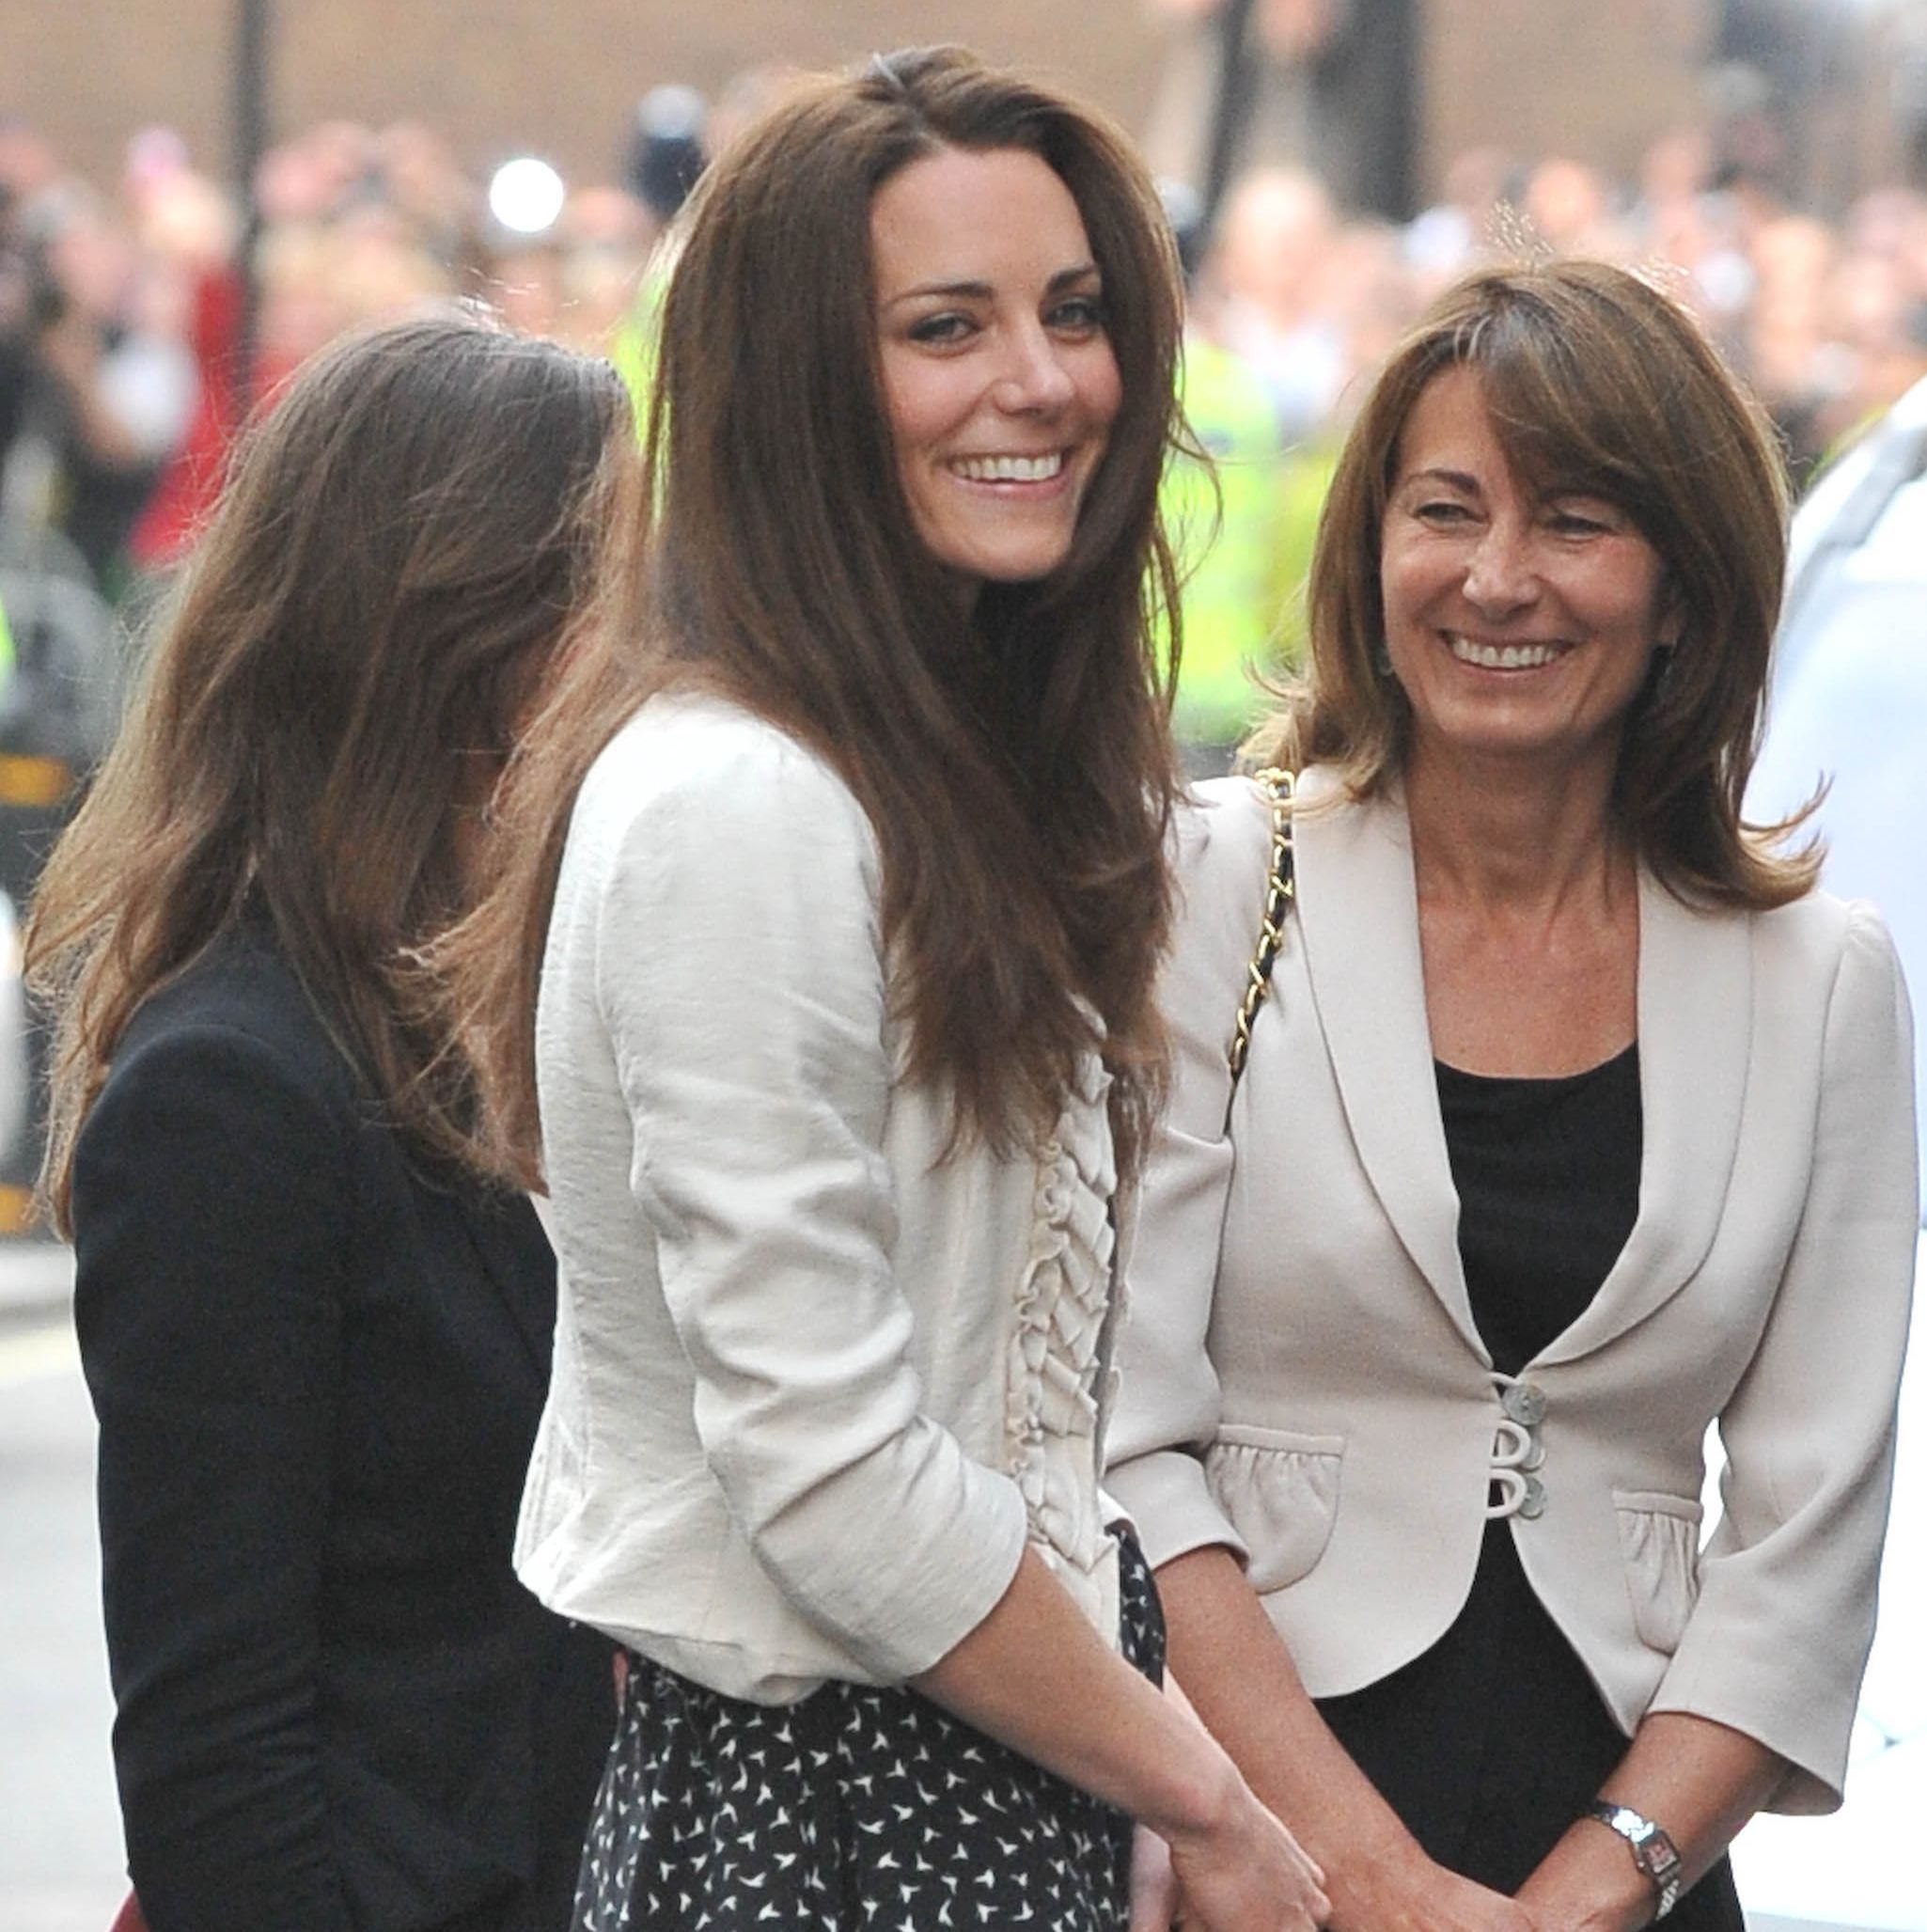 Carole Middleton Posts and Deletes Unseen Childhood Photo of Kate Middleton